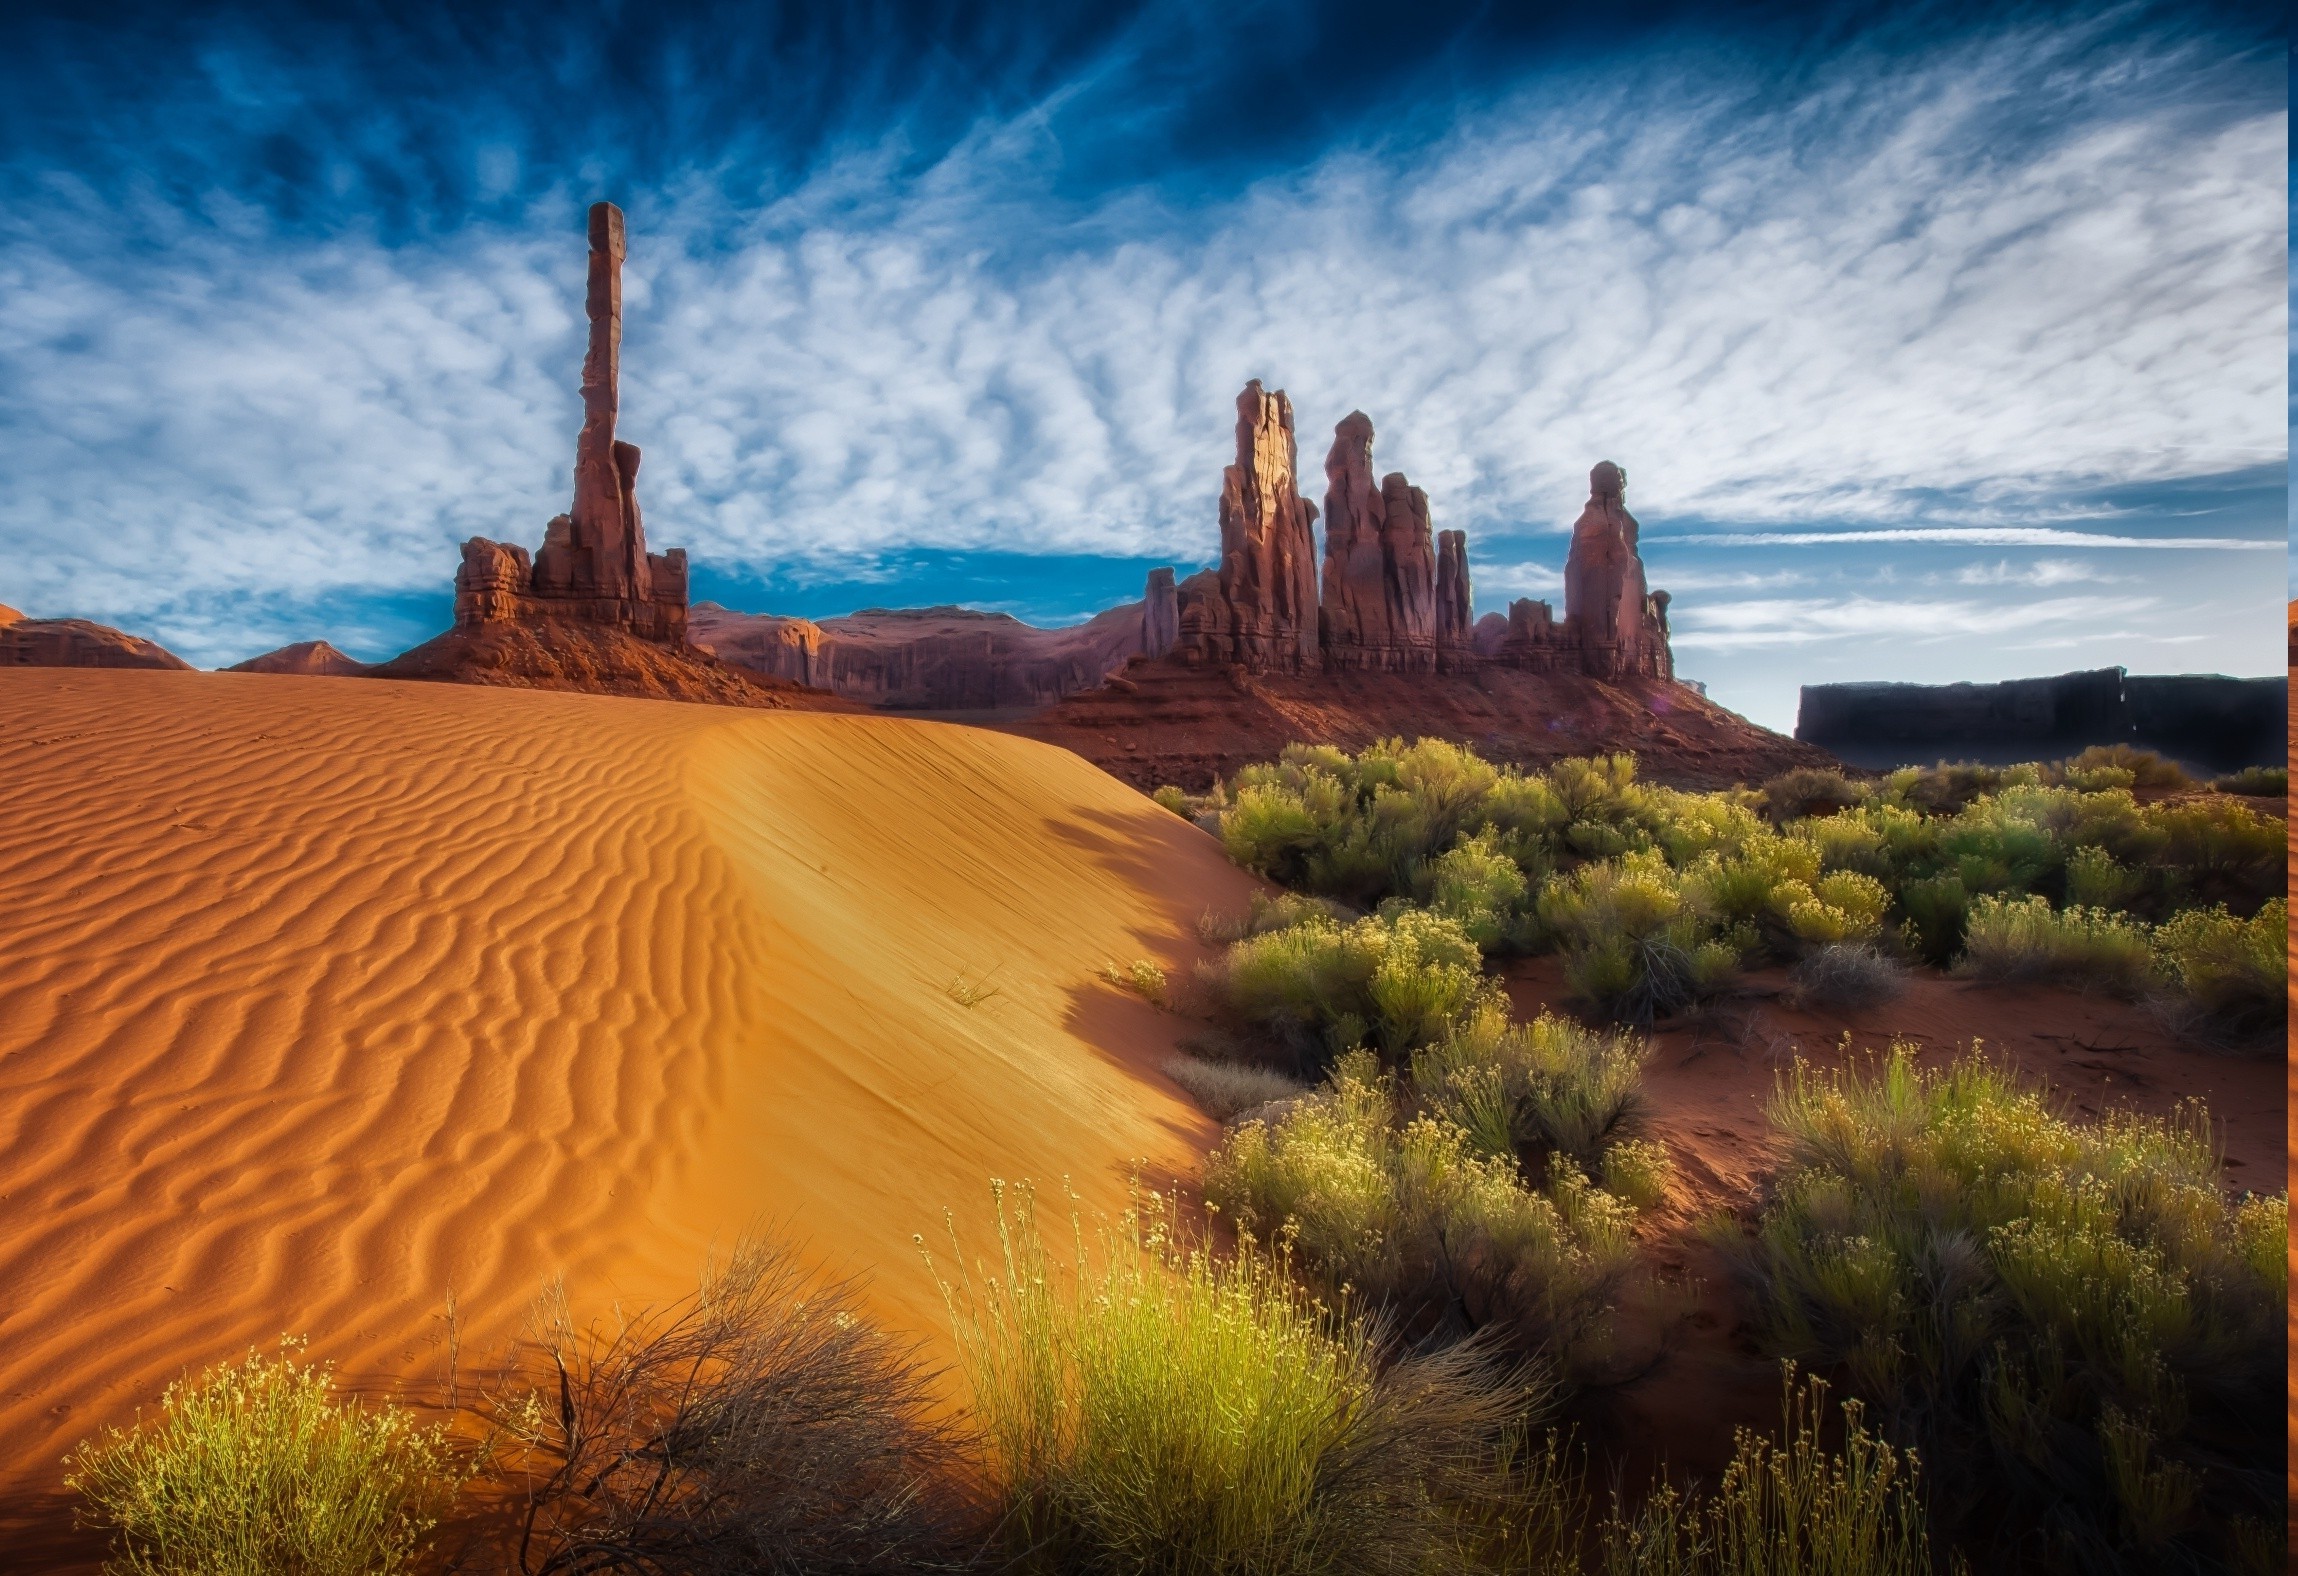 2298x1576 dune, Arizona, Shrubs, Rock, Clouds, Erosion, Nature, Landscape, Monument  Valley Wallpapers HD / Desktop and Mobile Backgrounds